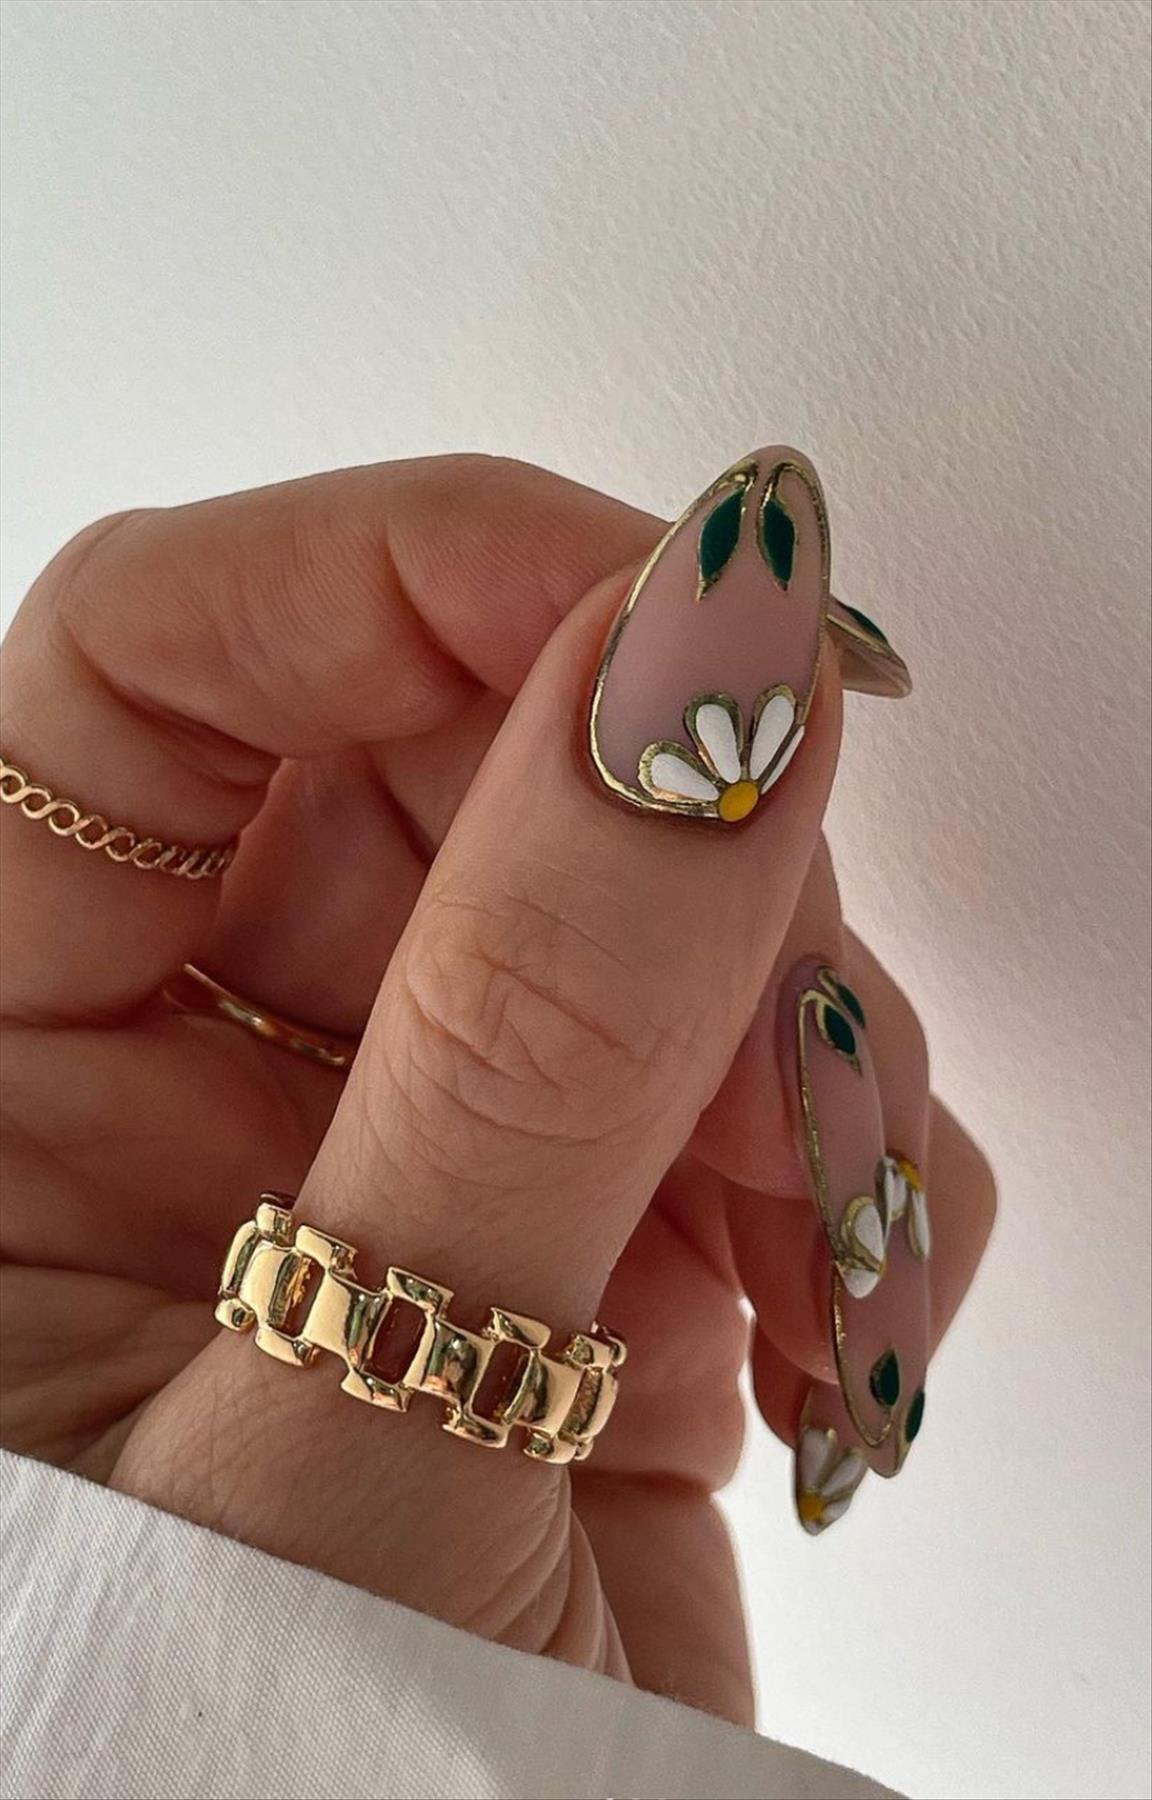 Best Graduation Nail Designs Perfect For Your Big Day